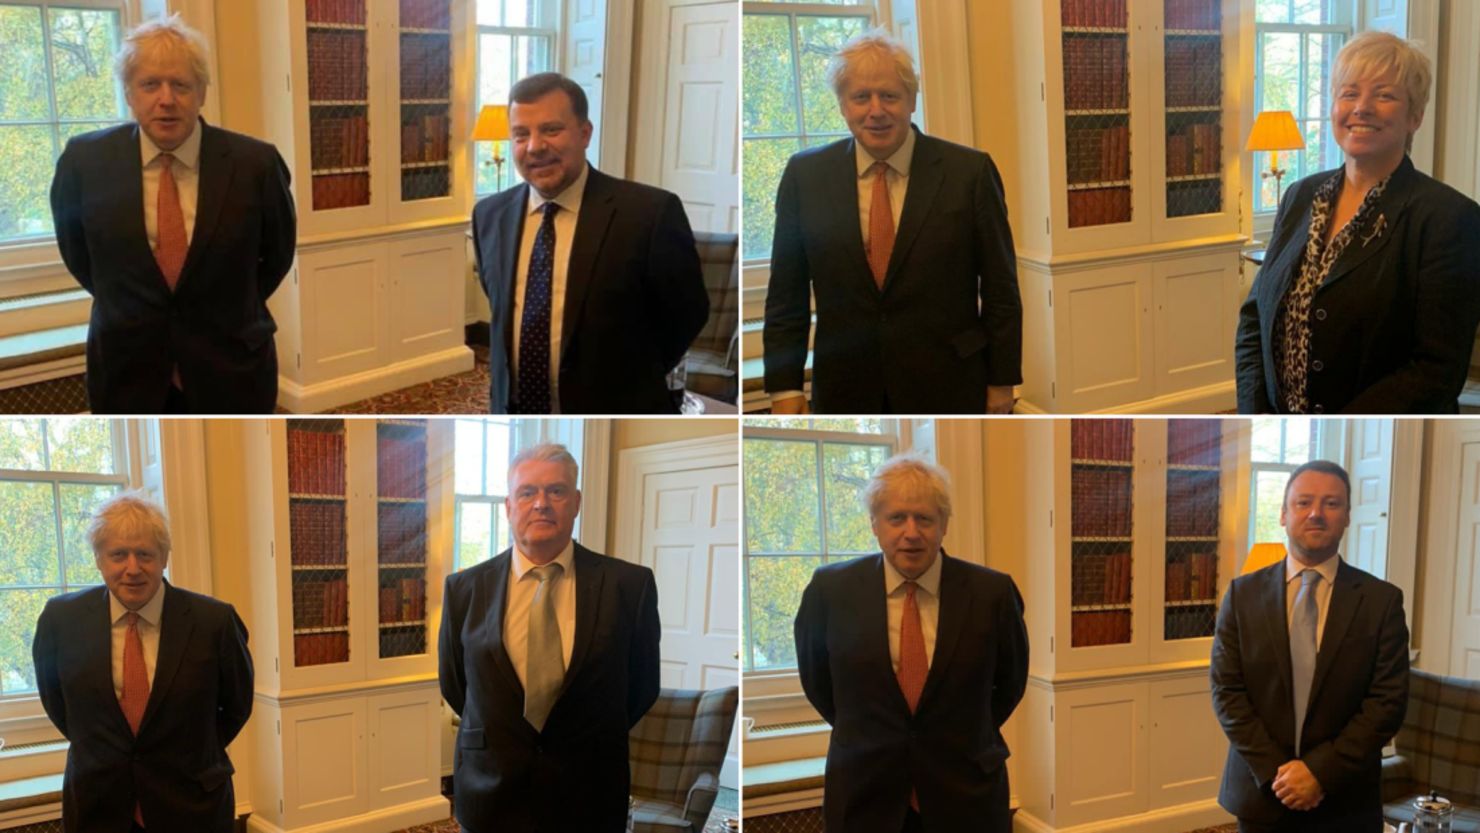 British MPs posted photos on social media of their respective meetings with Johnson on November 12. From clockwise top left: Andy Carter, Lia Nici, Brendan Clarke-Smith, and Lee Anderson.